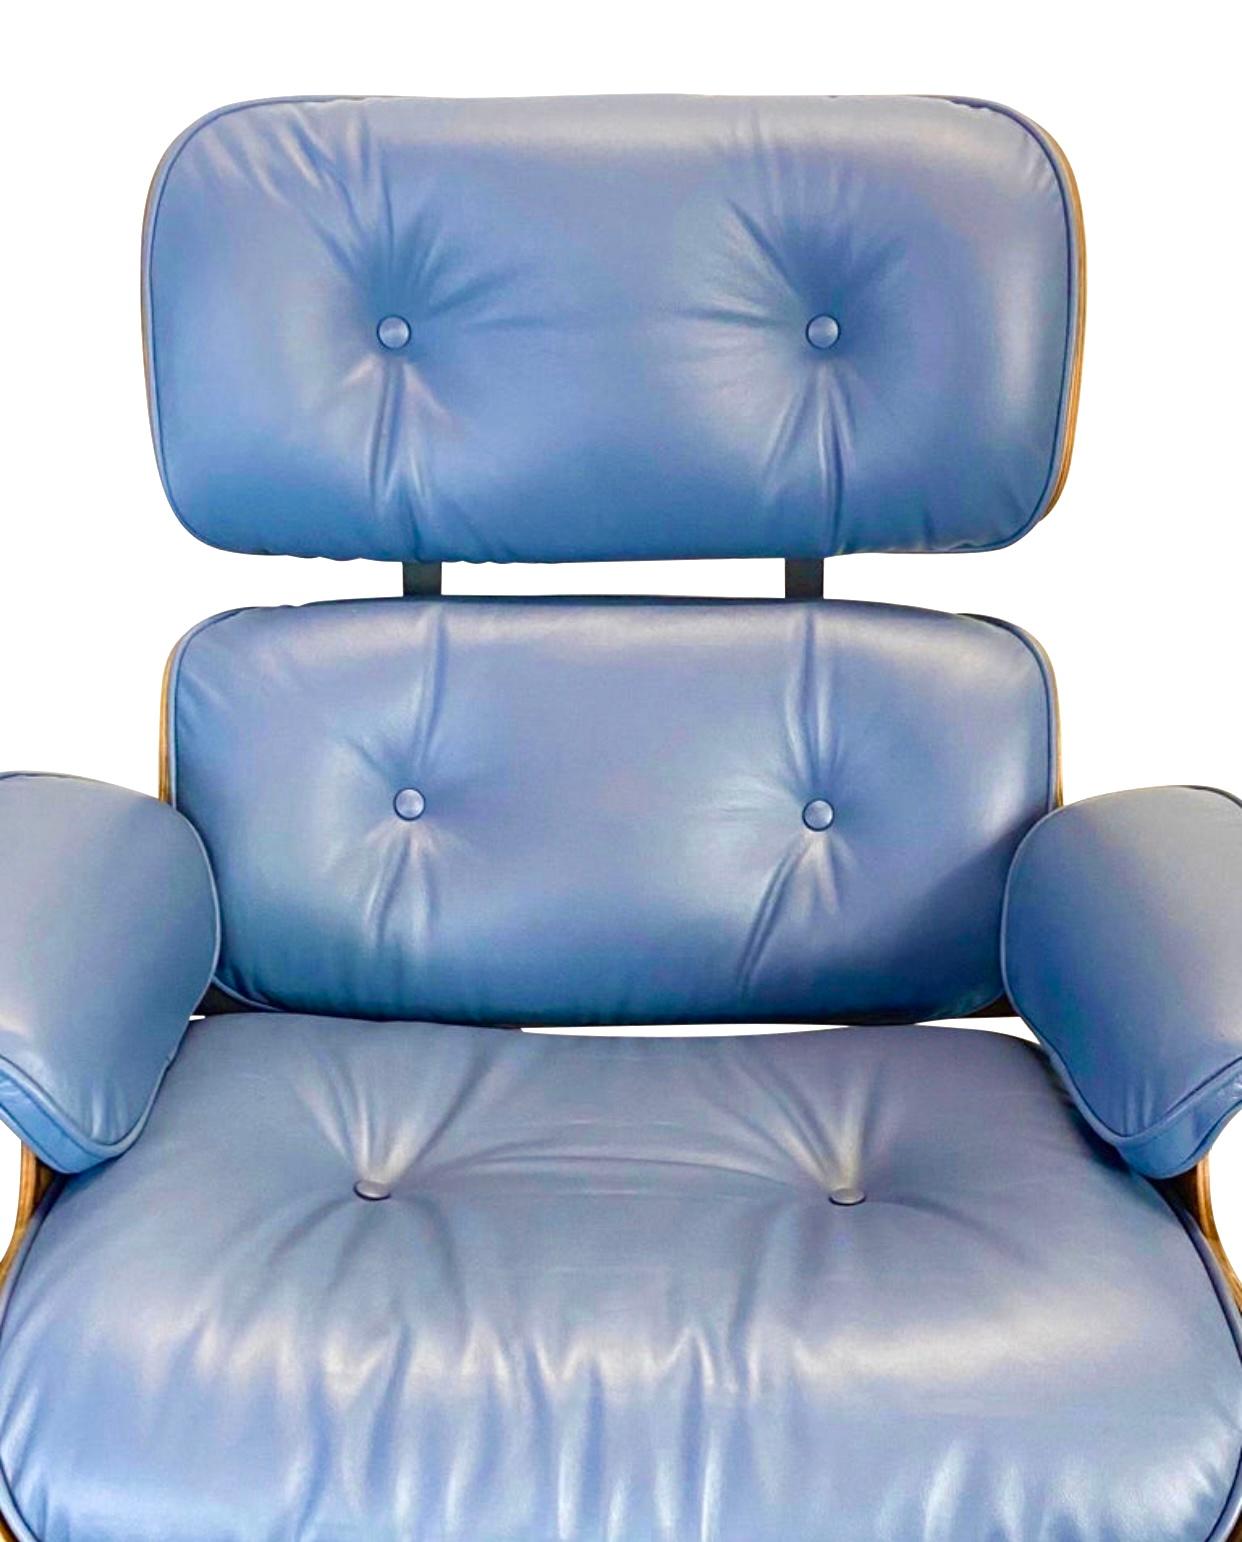 North American Rare Custom Herman Miller Eames Lounge Chair & Ottoman with Perfect Blue Leather